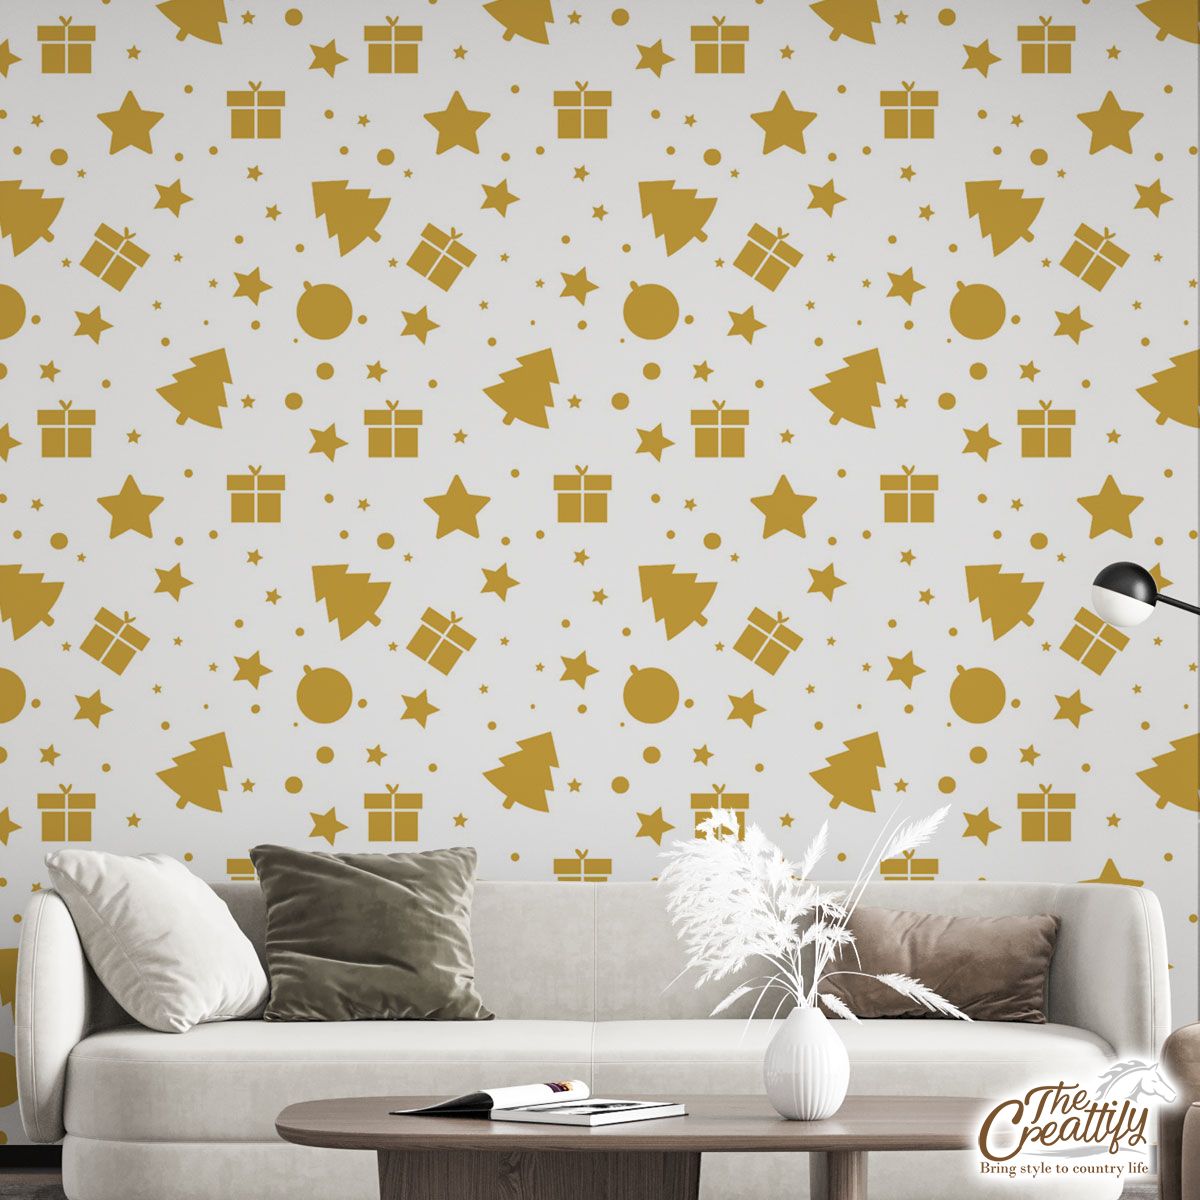 Christmas Gifts, Baudles And Pine Tree Silhouette Filled In Gold Color Pattern Wall Mural